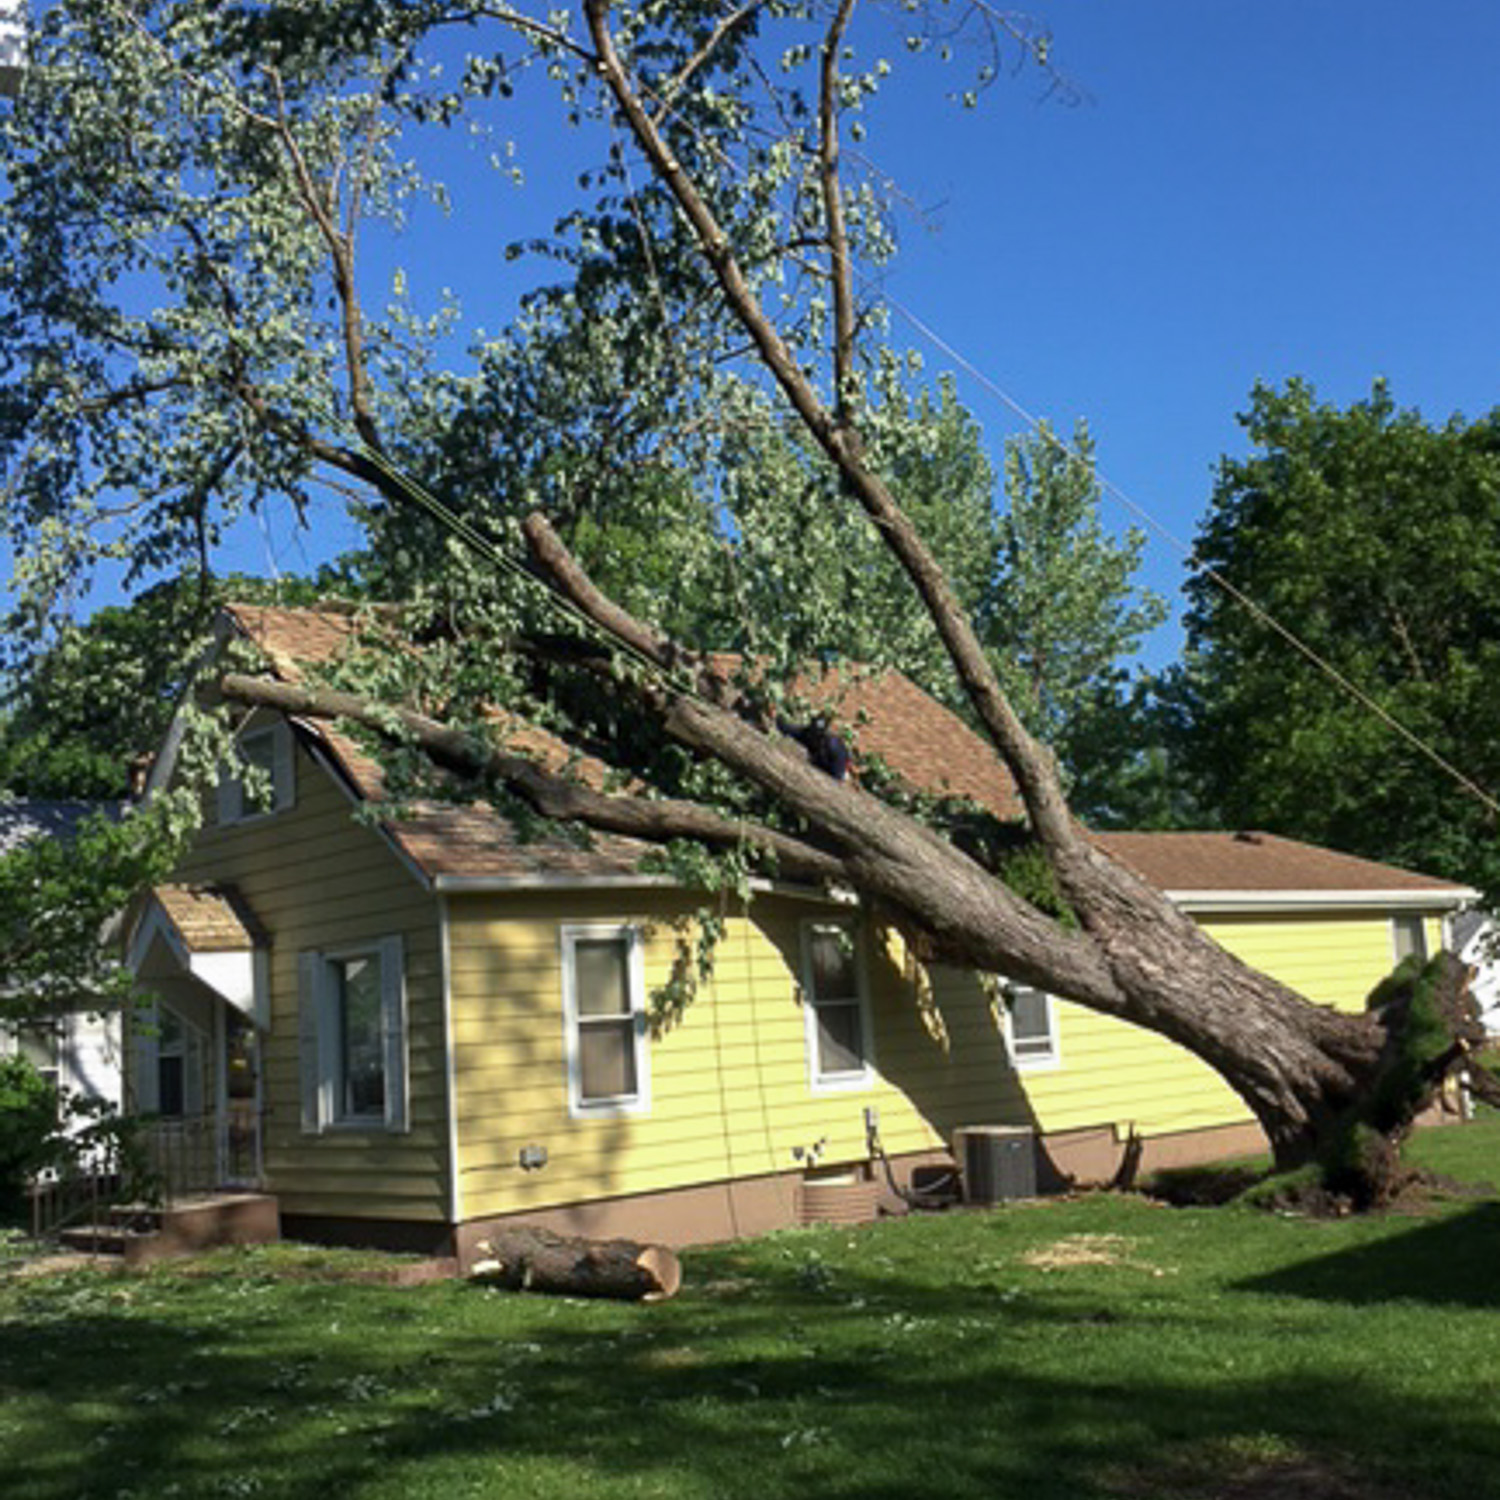 wind damage-large fallen tree on the roof of a house.